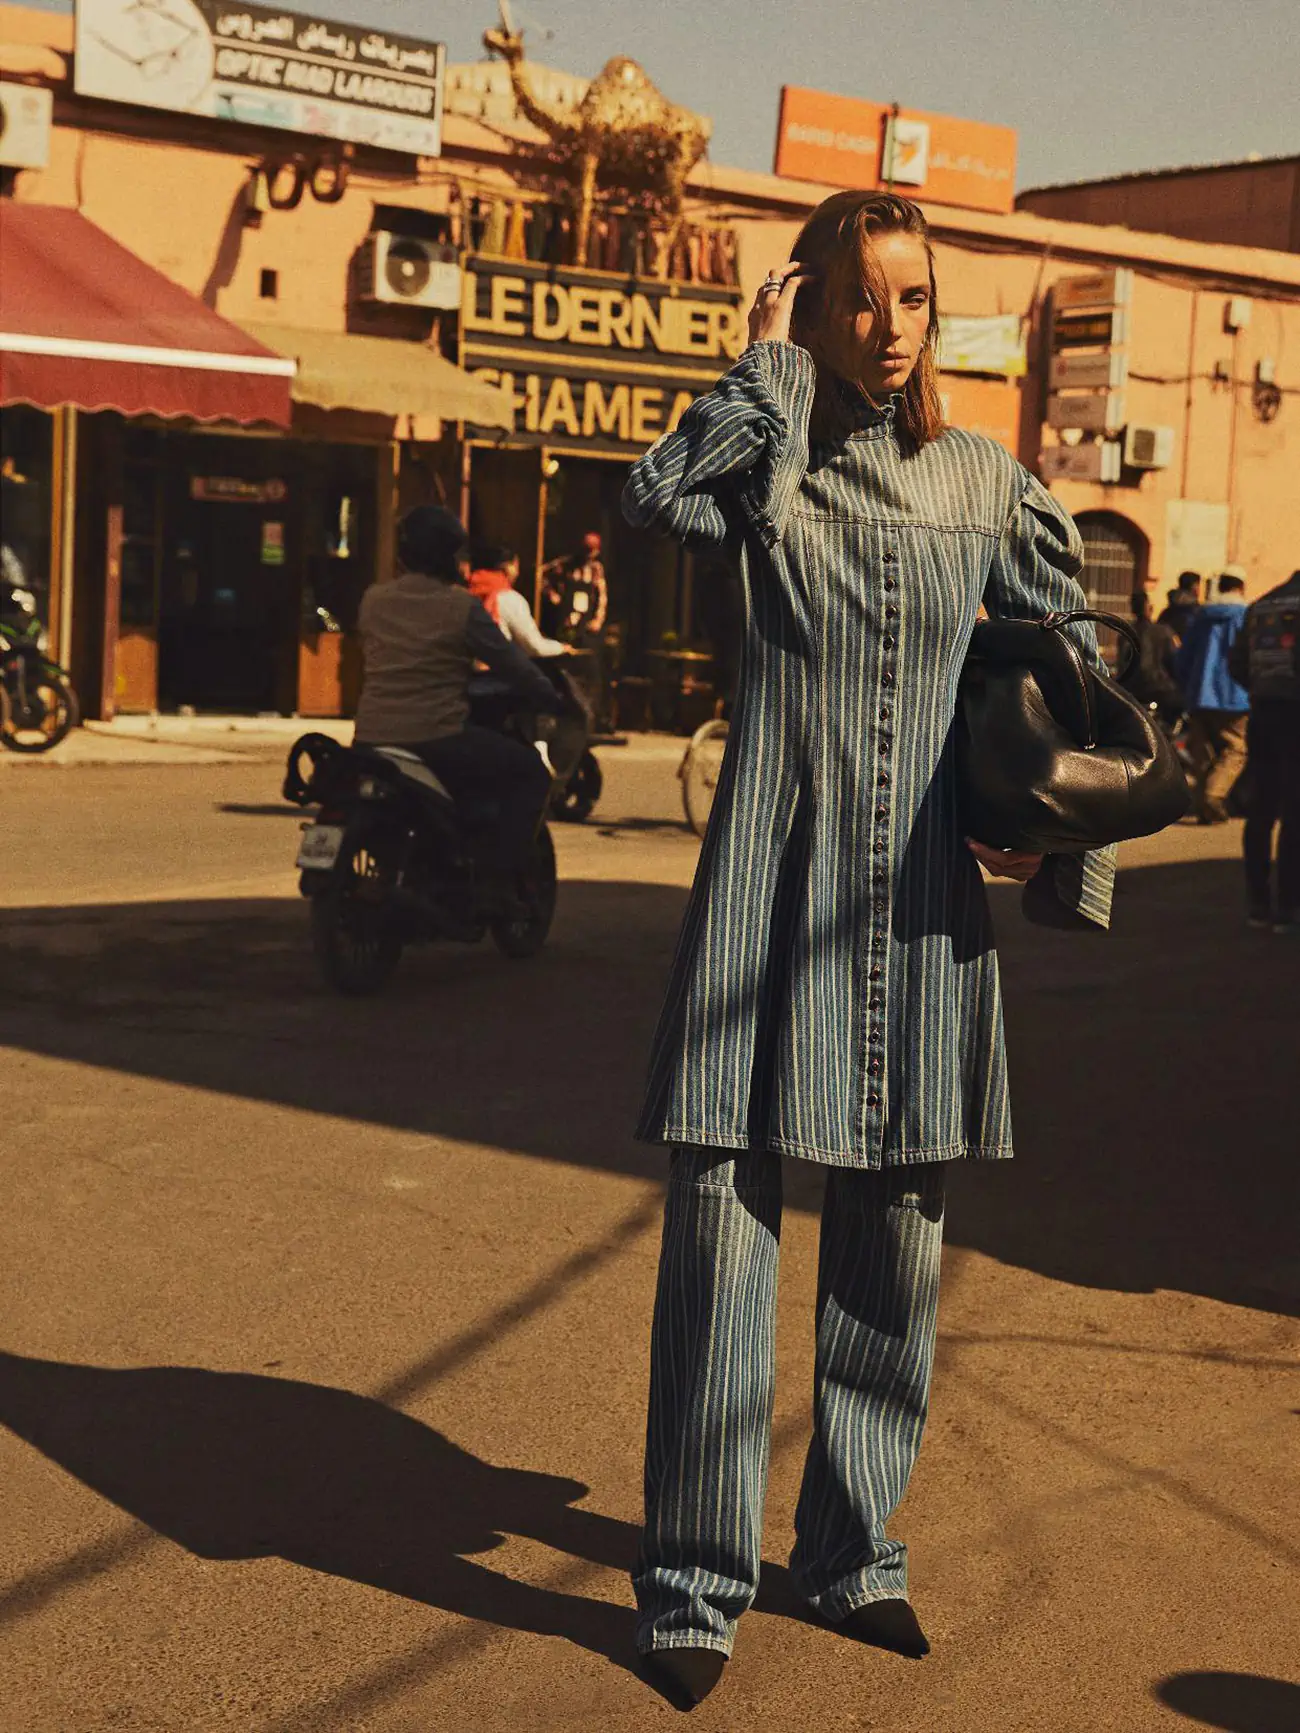 Jamilla Hoogenboom by Adriano Russo for Elle Italia March 30th, 2023